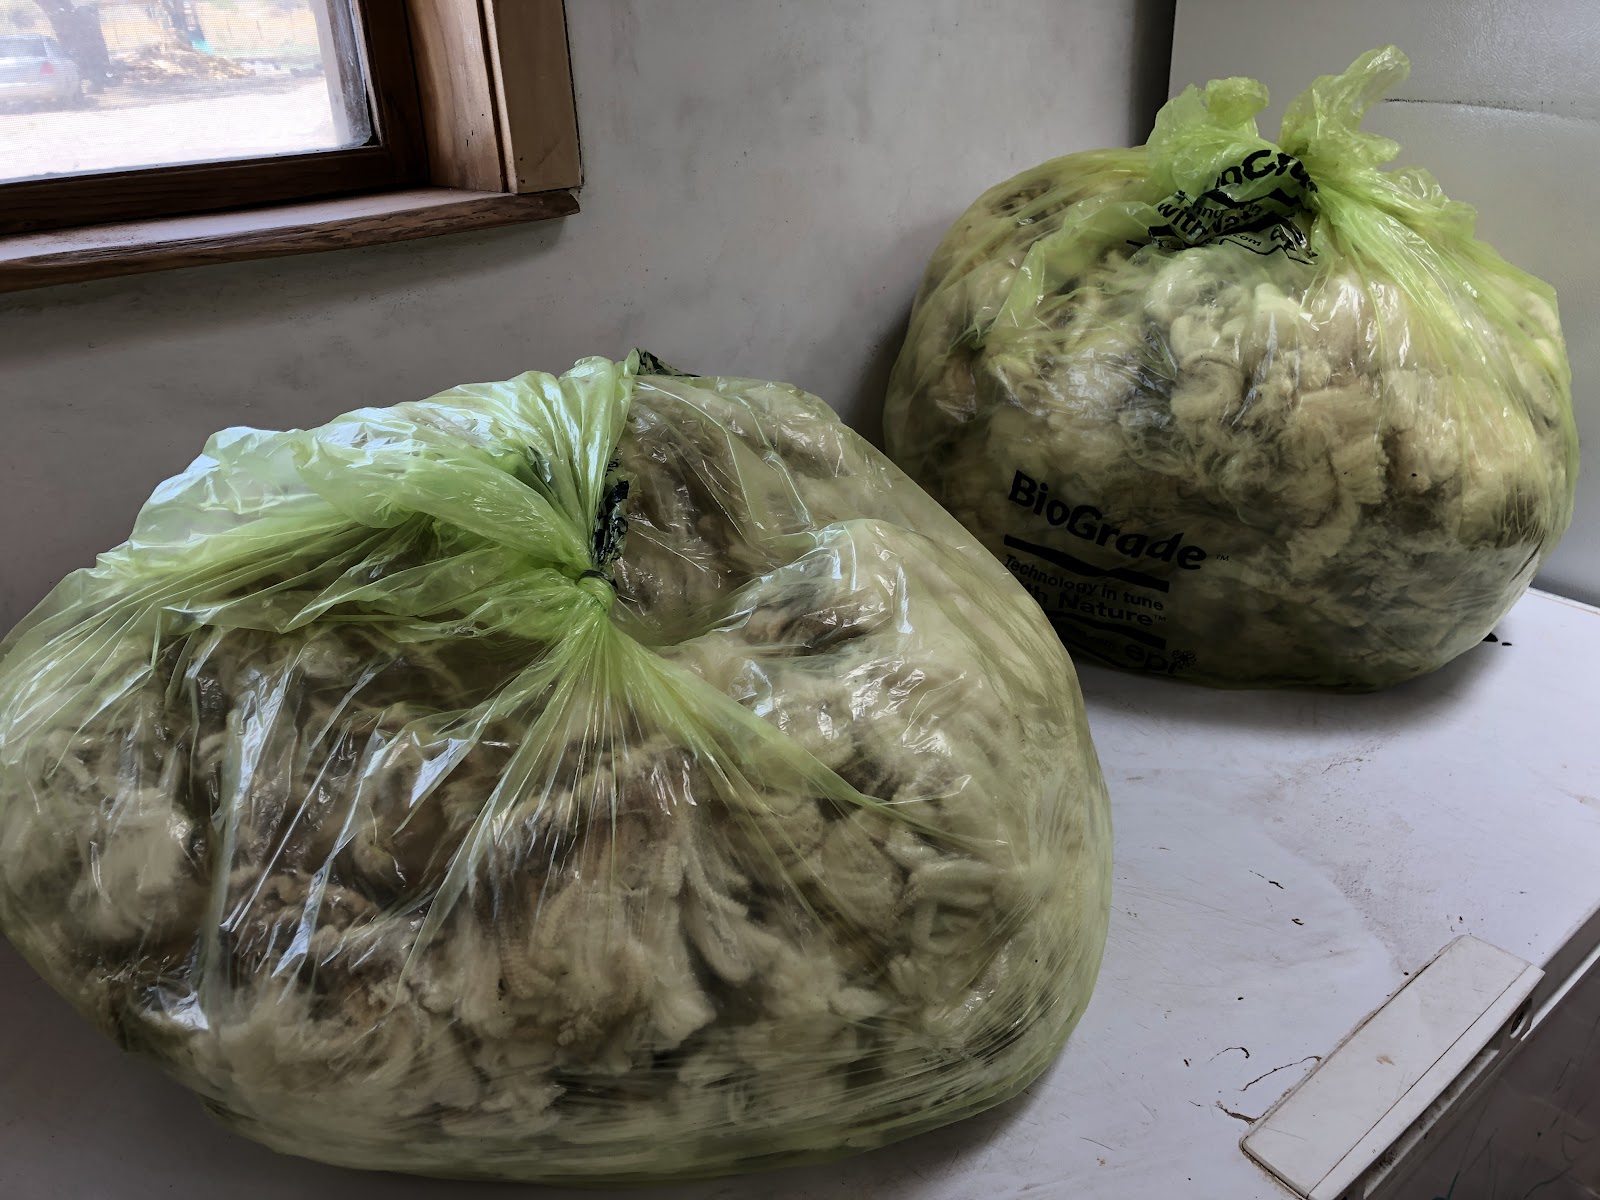 Bags of wool on table